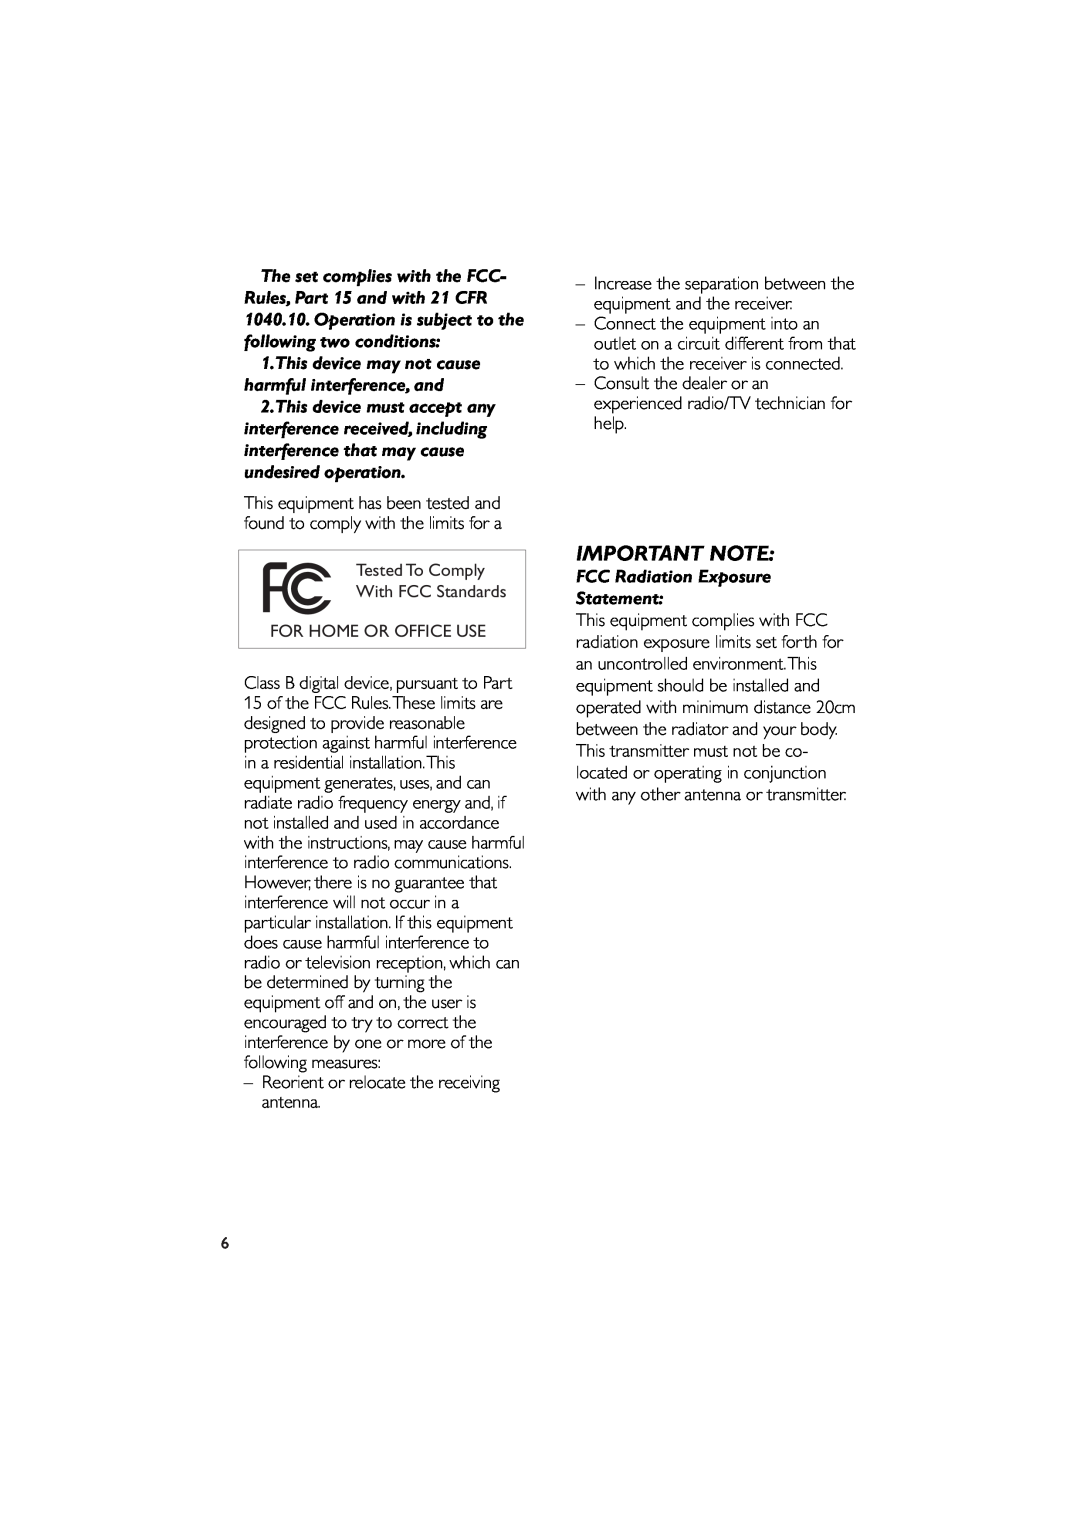 Philips MCW770 manual Important Note, FCC Radiation Exposure Statement 